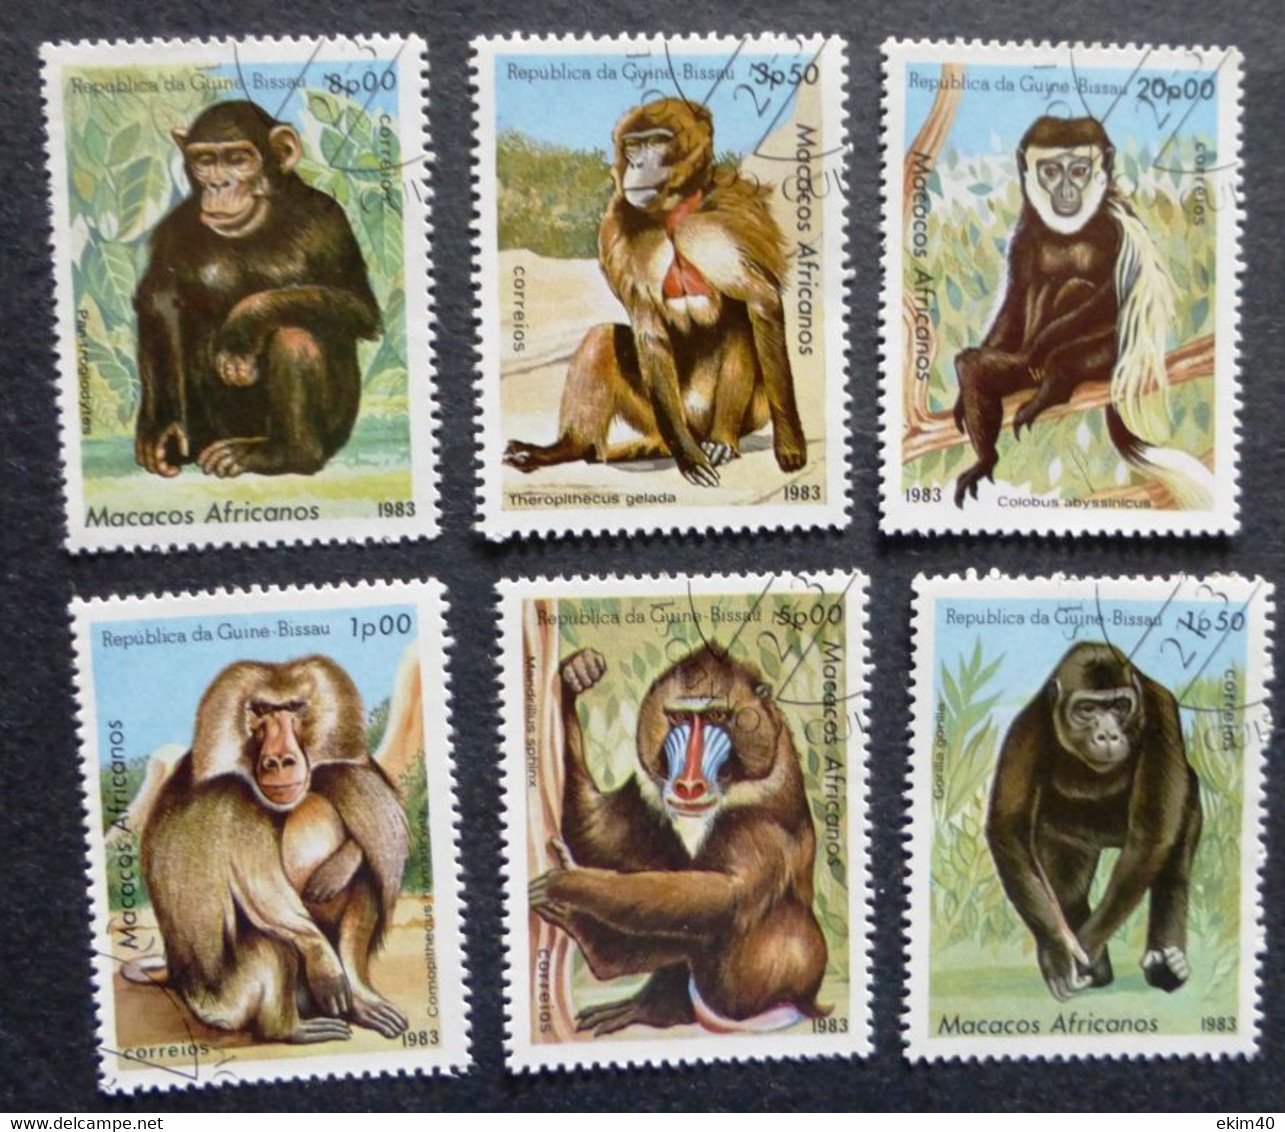 Selection Of Used/Cancelled Stamps From Guinne Bissau Wild Animals. No DC-376 - Gebruikt